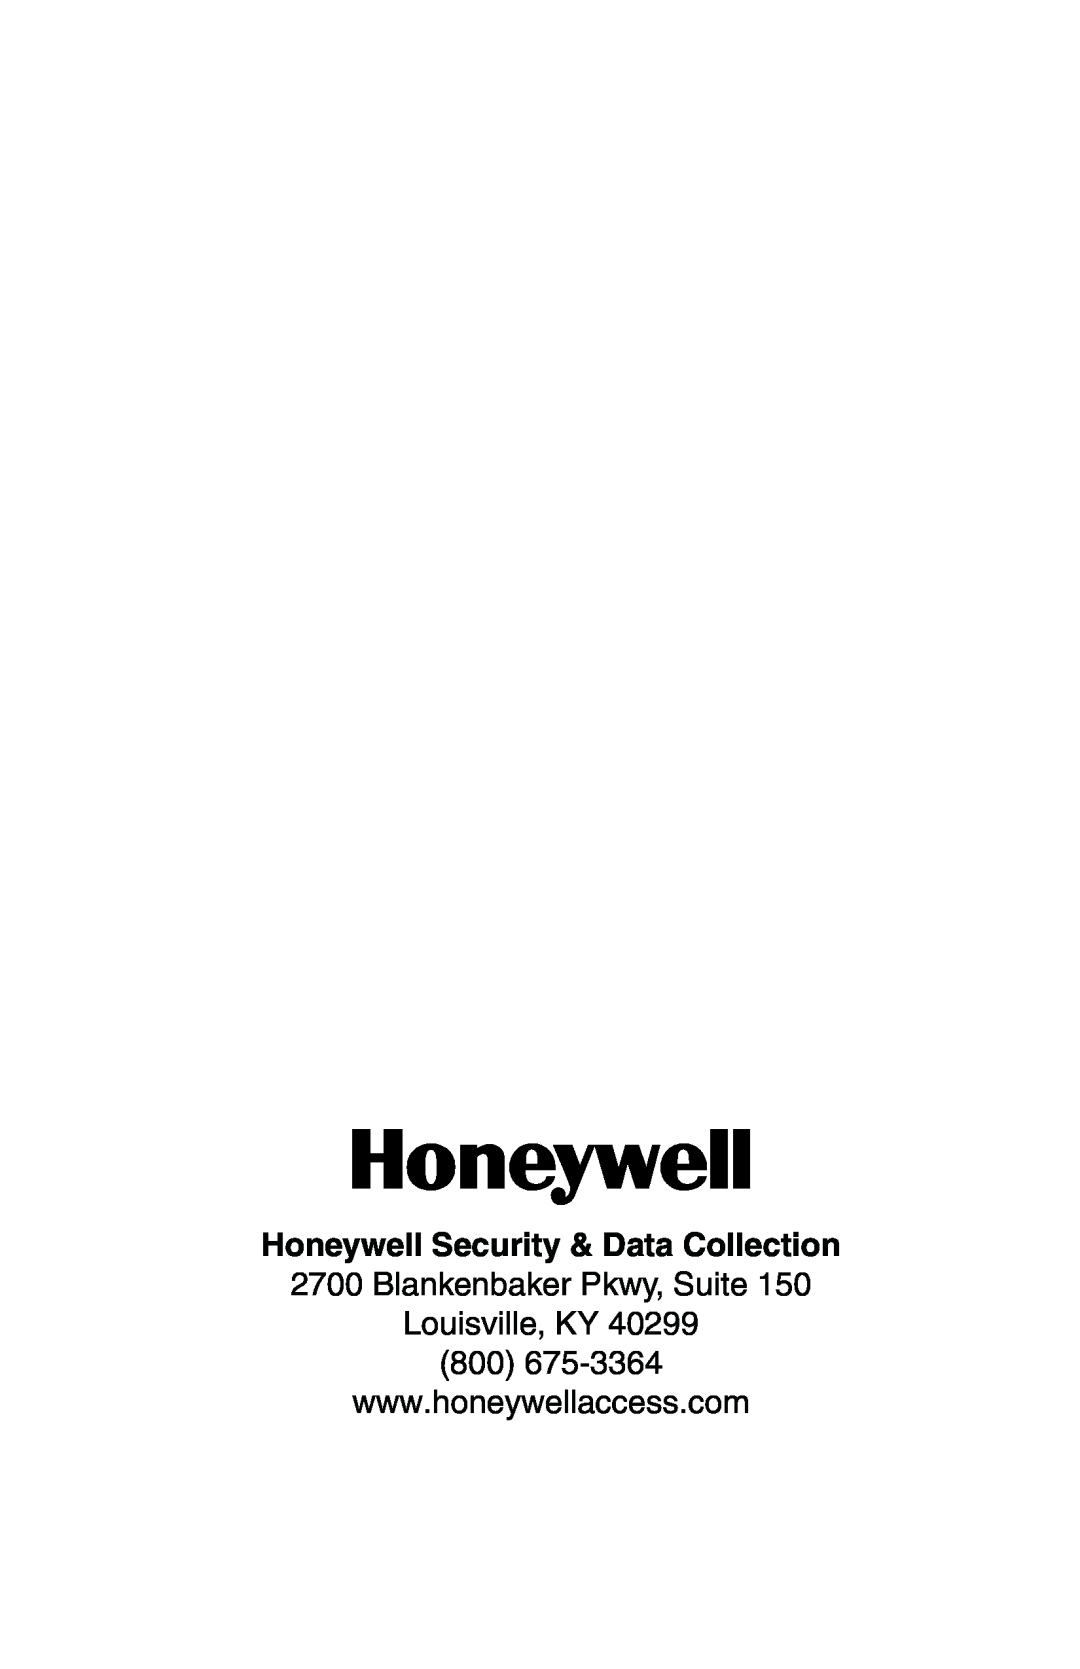 Honeywell PRO-2200 installation manual Honeywell Security & Data Collection, Blankenbaker Pkwy, Suite Louisville, KY 